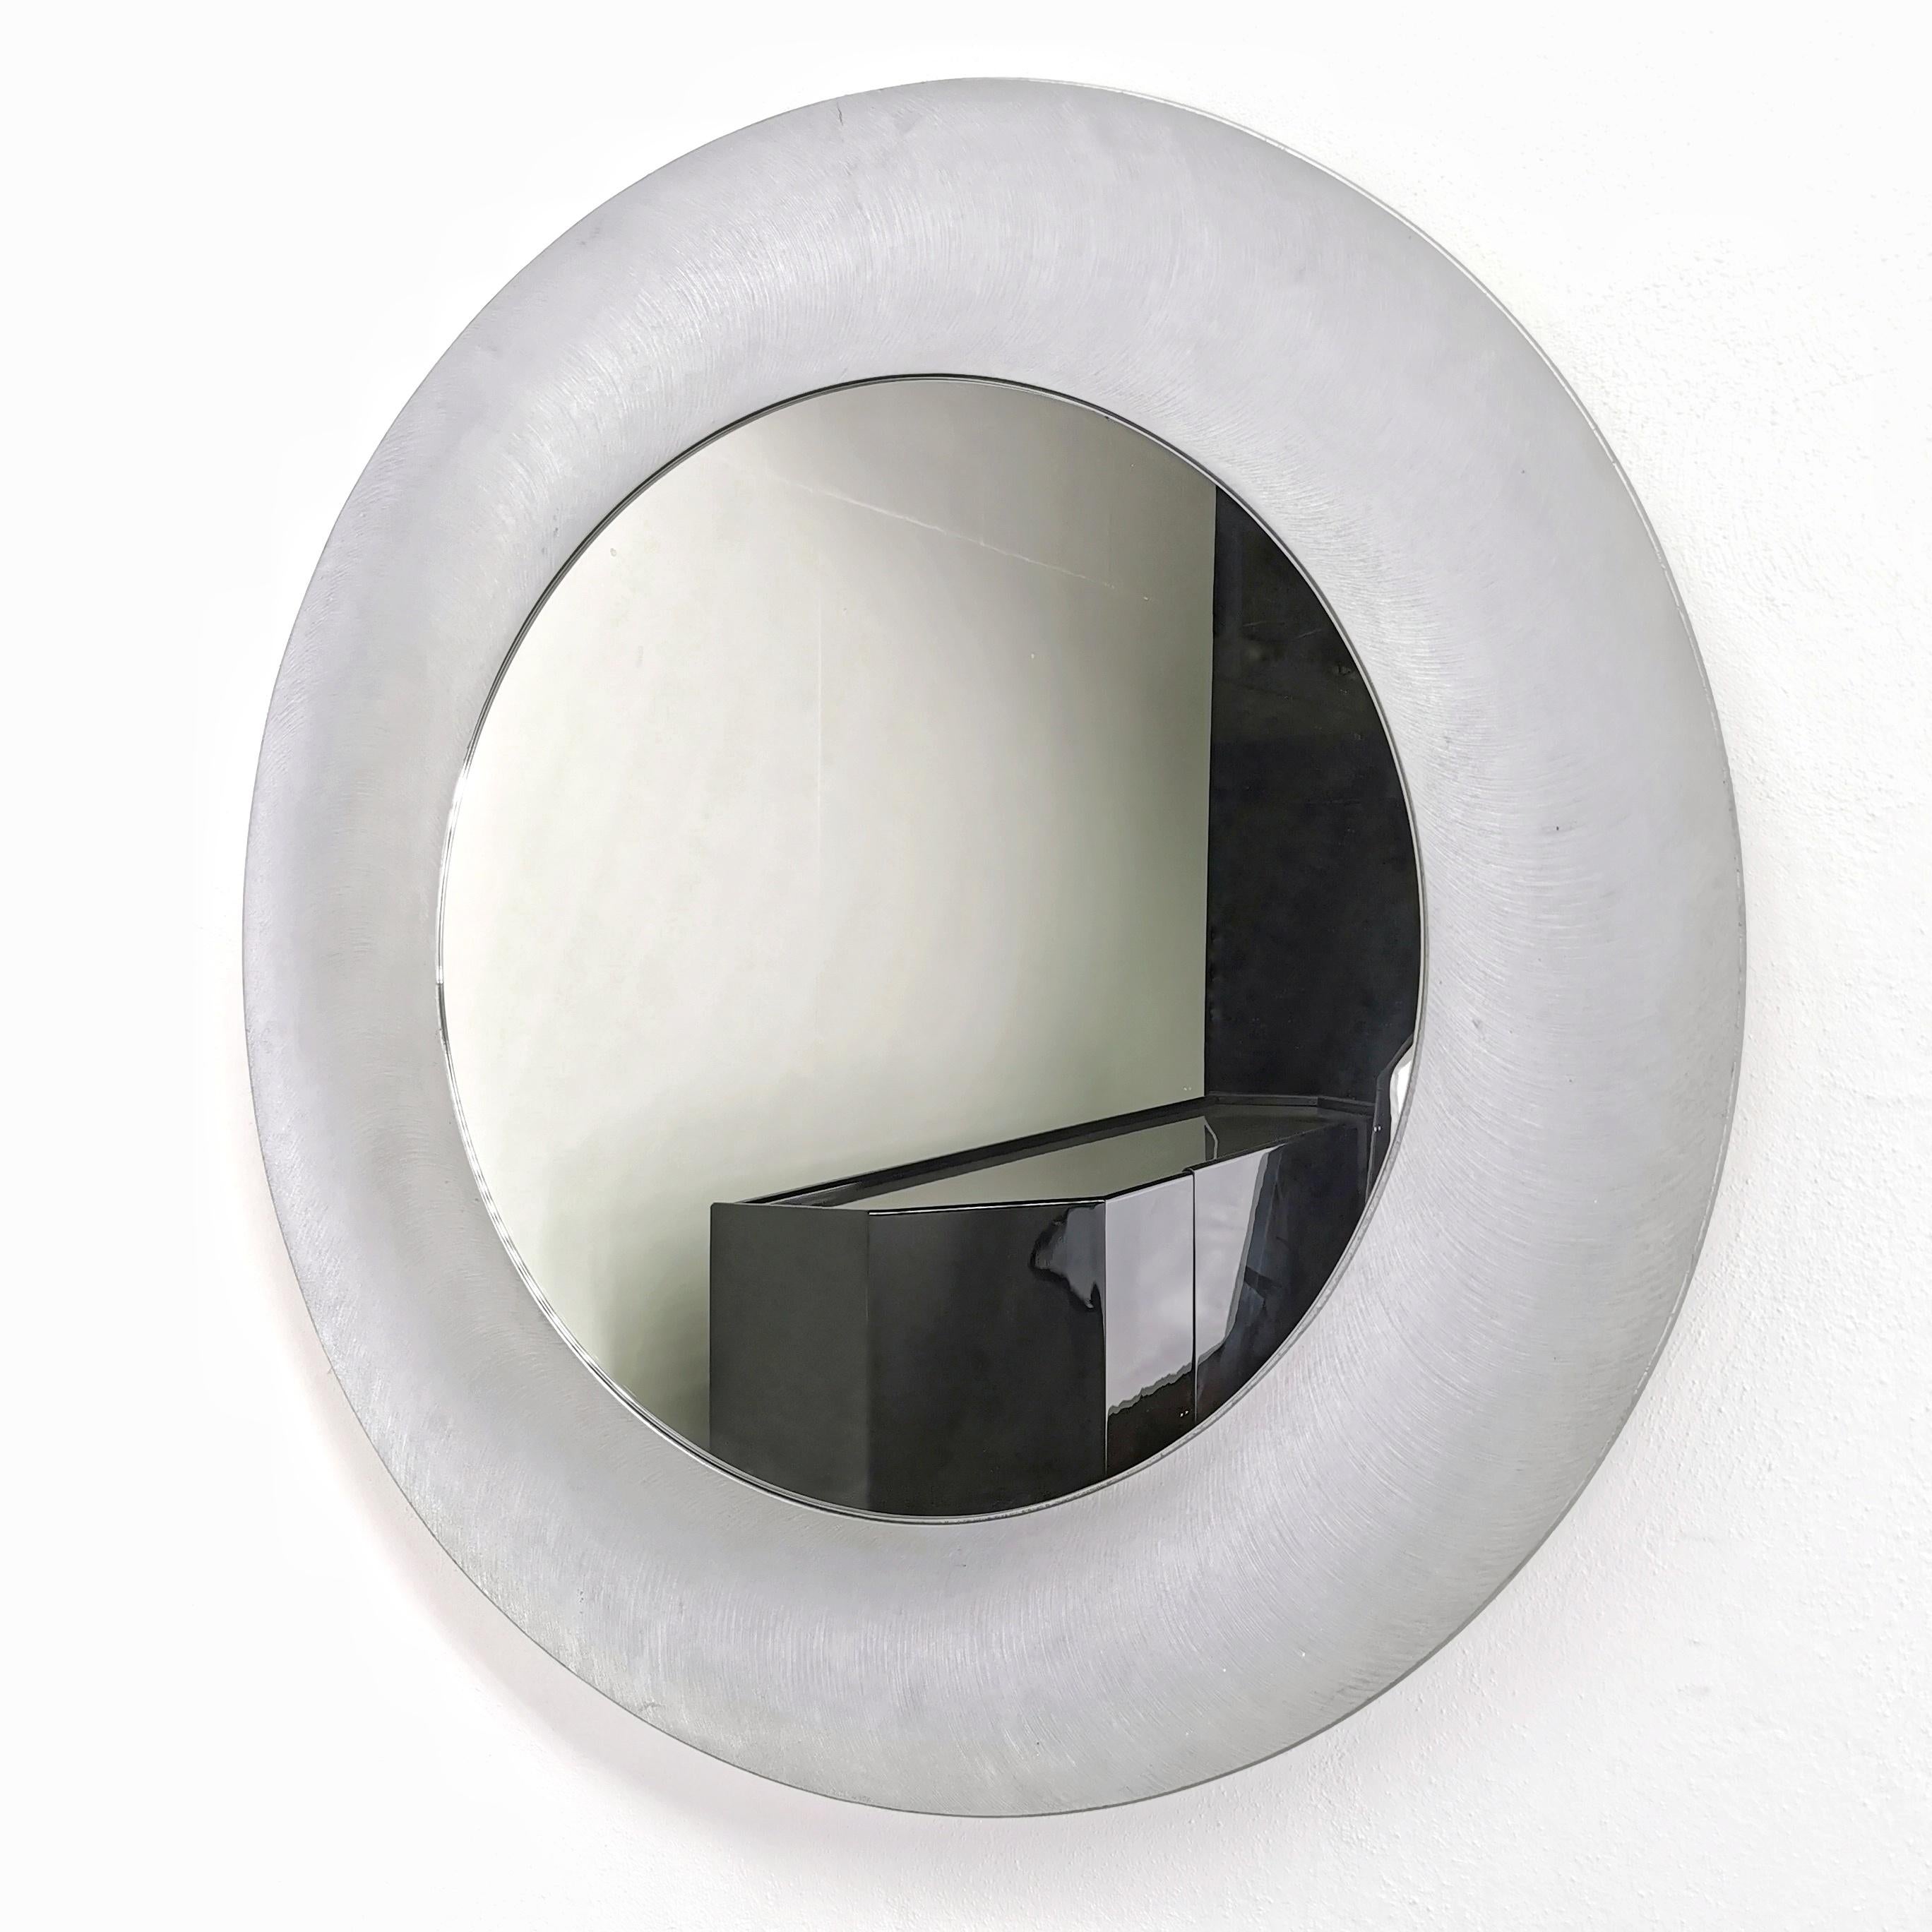 Rare round sculptural mirror with modernist style  brutalist designed in the 1970s by 'artist sculptor Lorenzo Burchiellaro. 
the mirror features a textured aluminum casting with a slightly concave shape. 
The mirror is in perfect condition with no